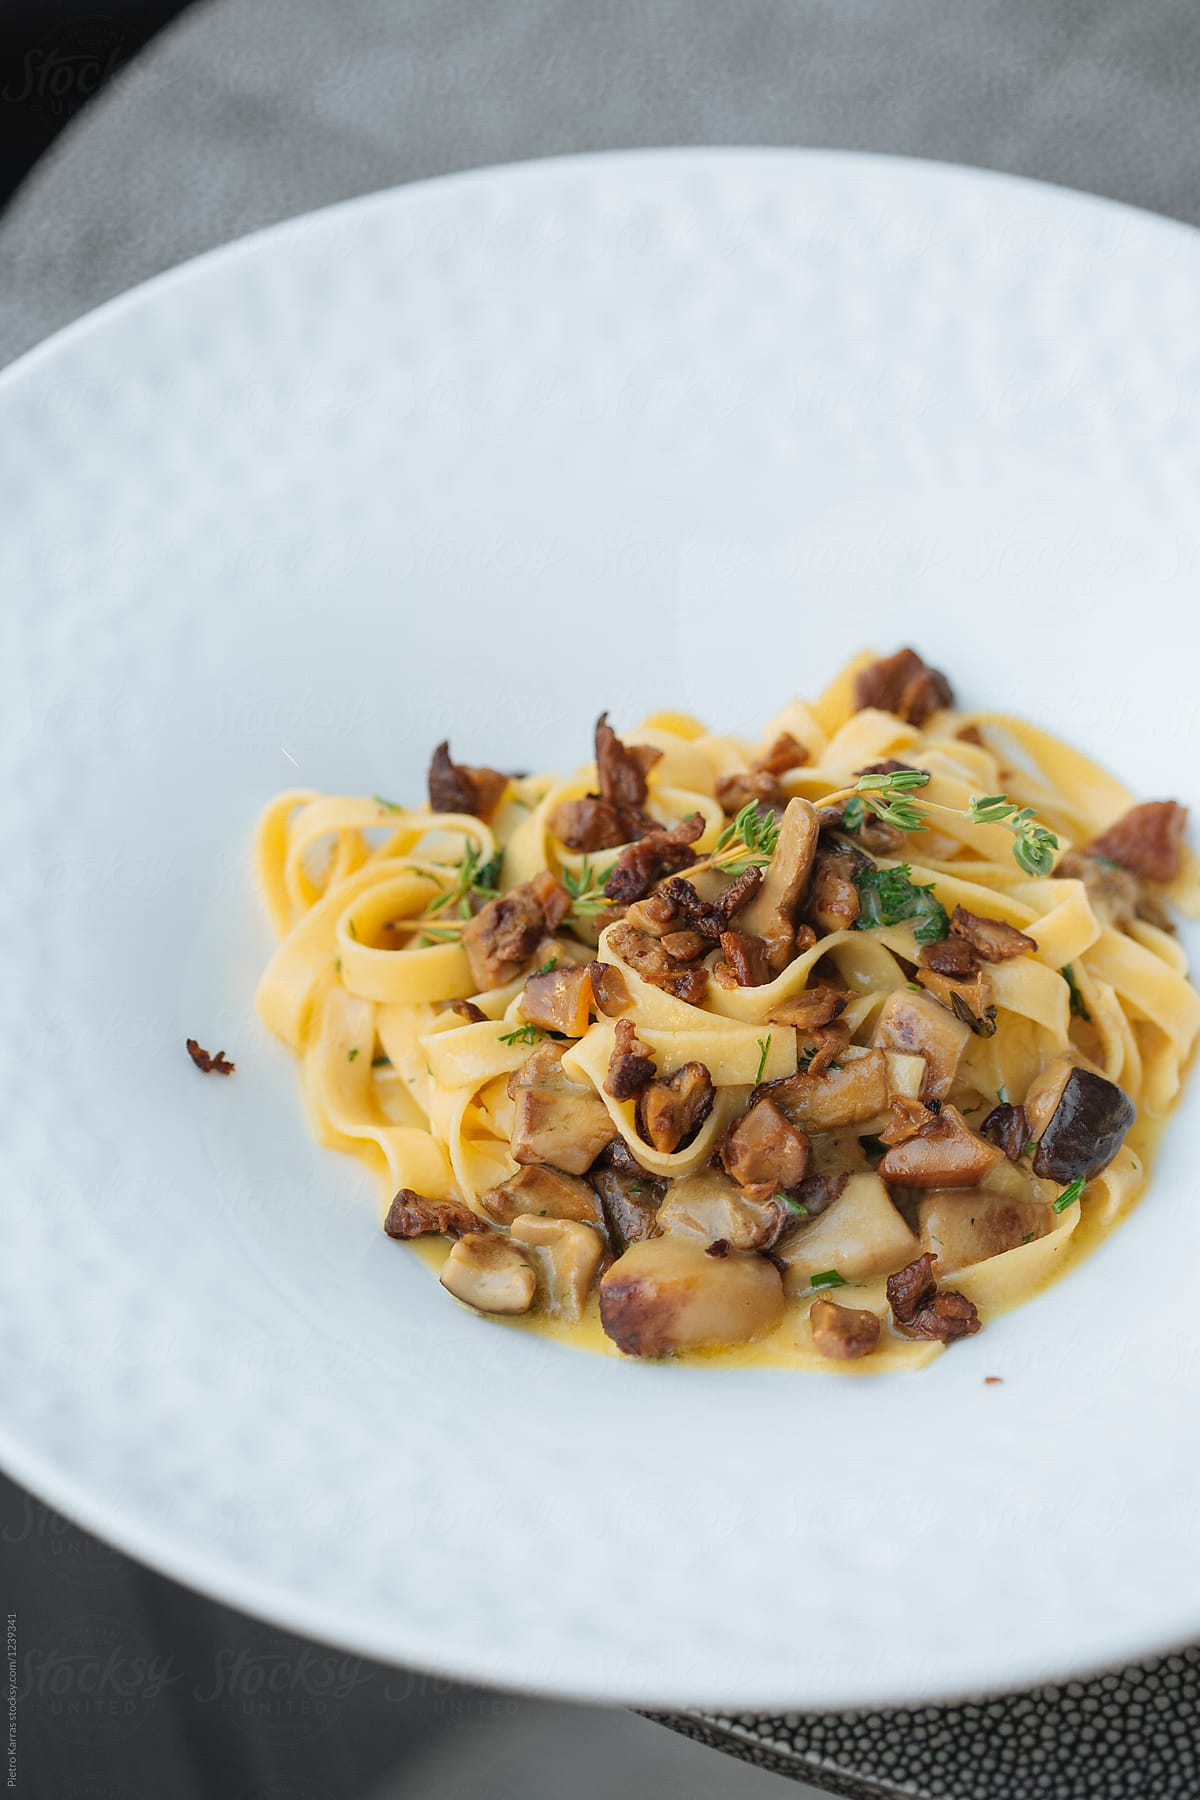 Plate of egg tagliatelle with diced wild mushrooms